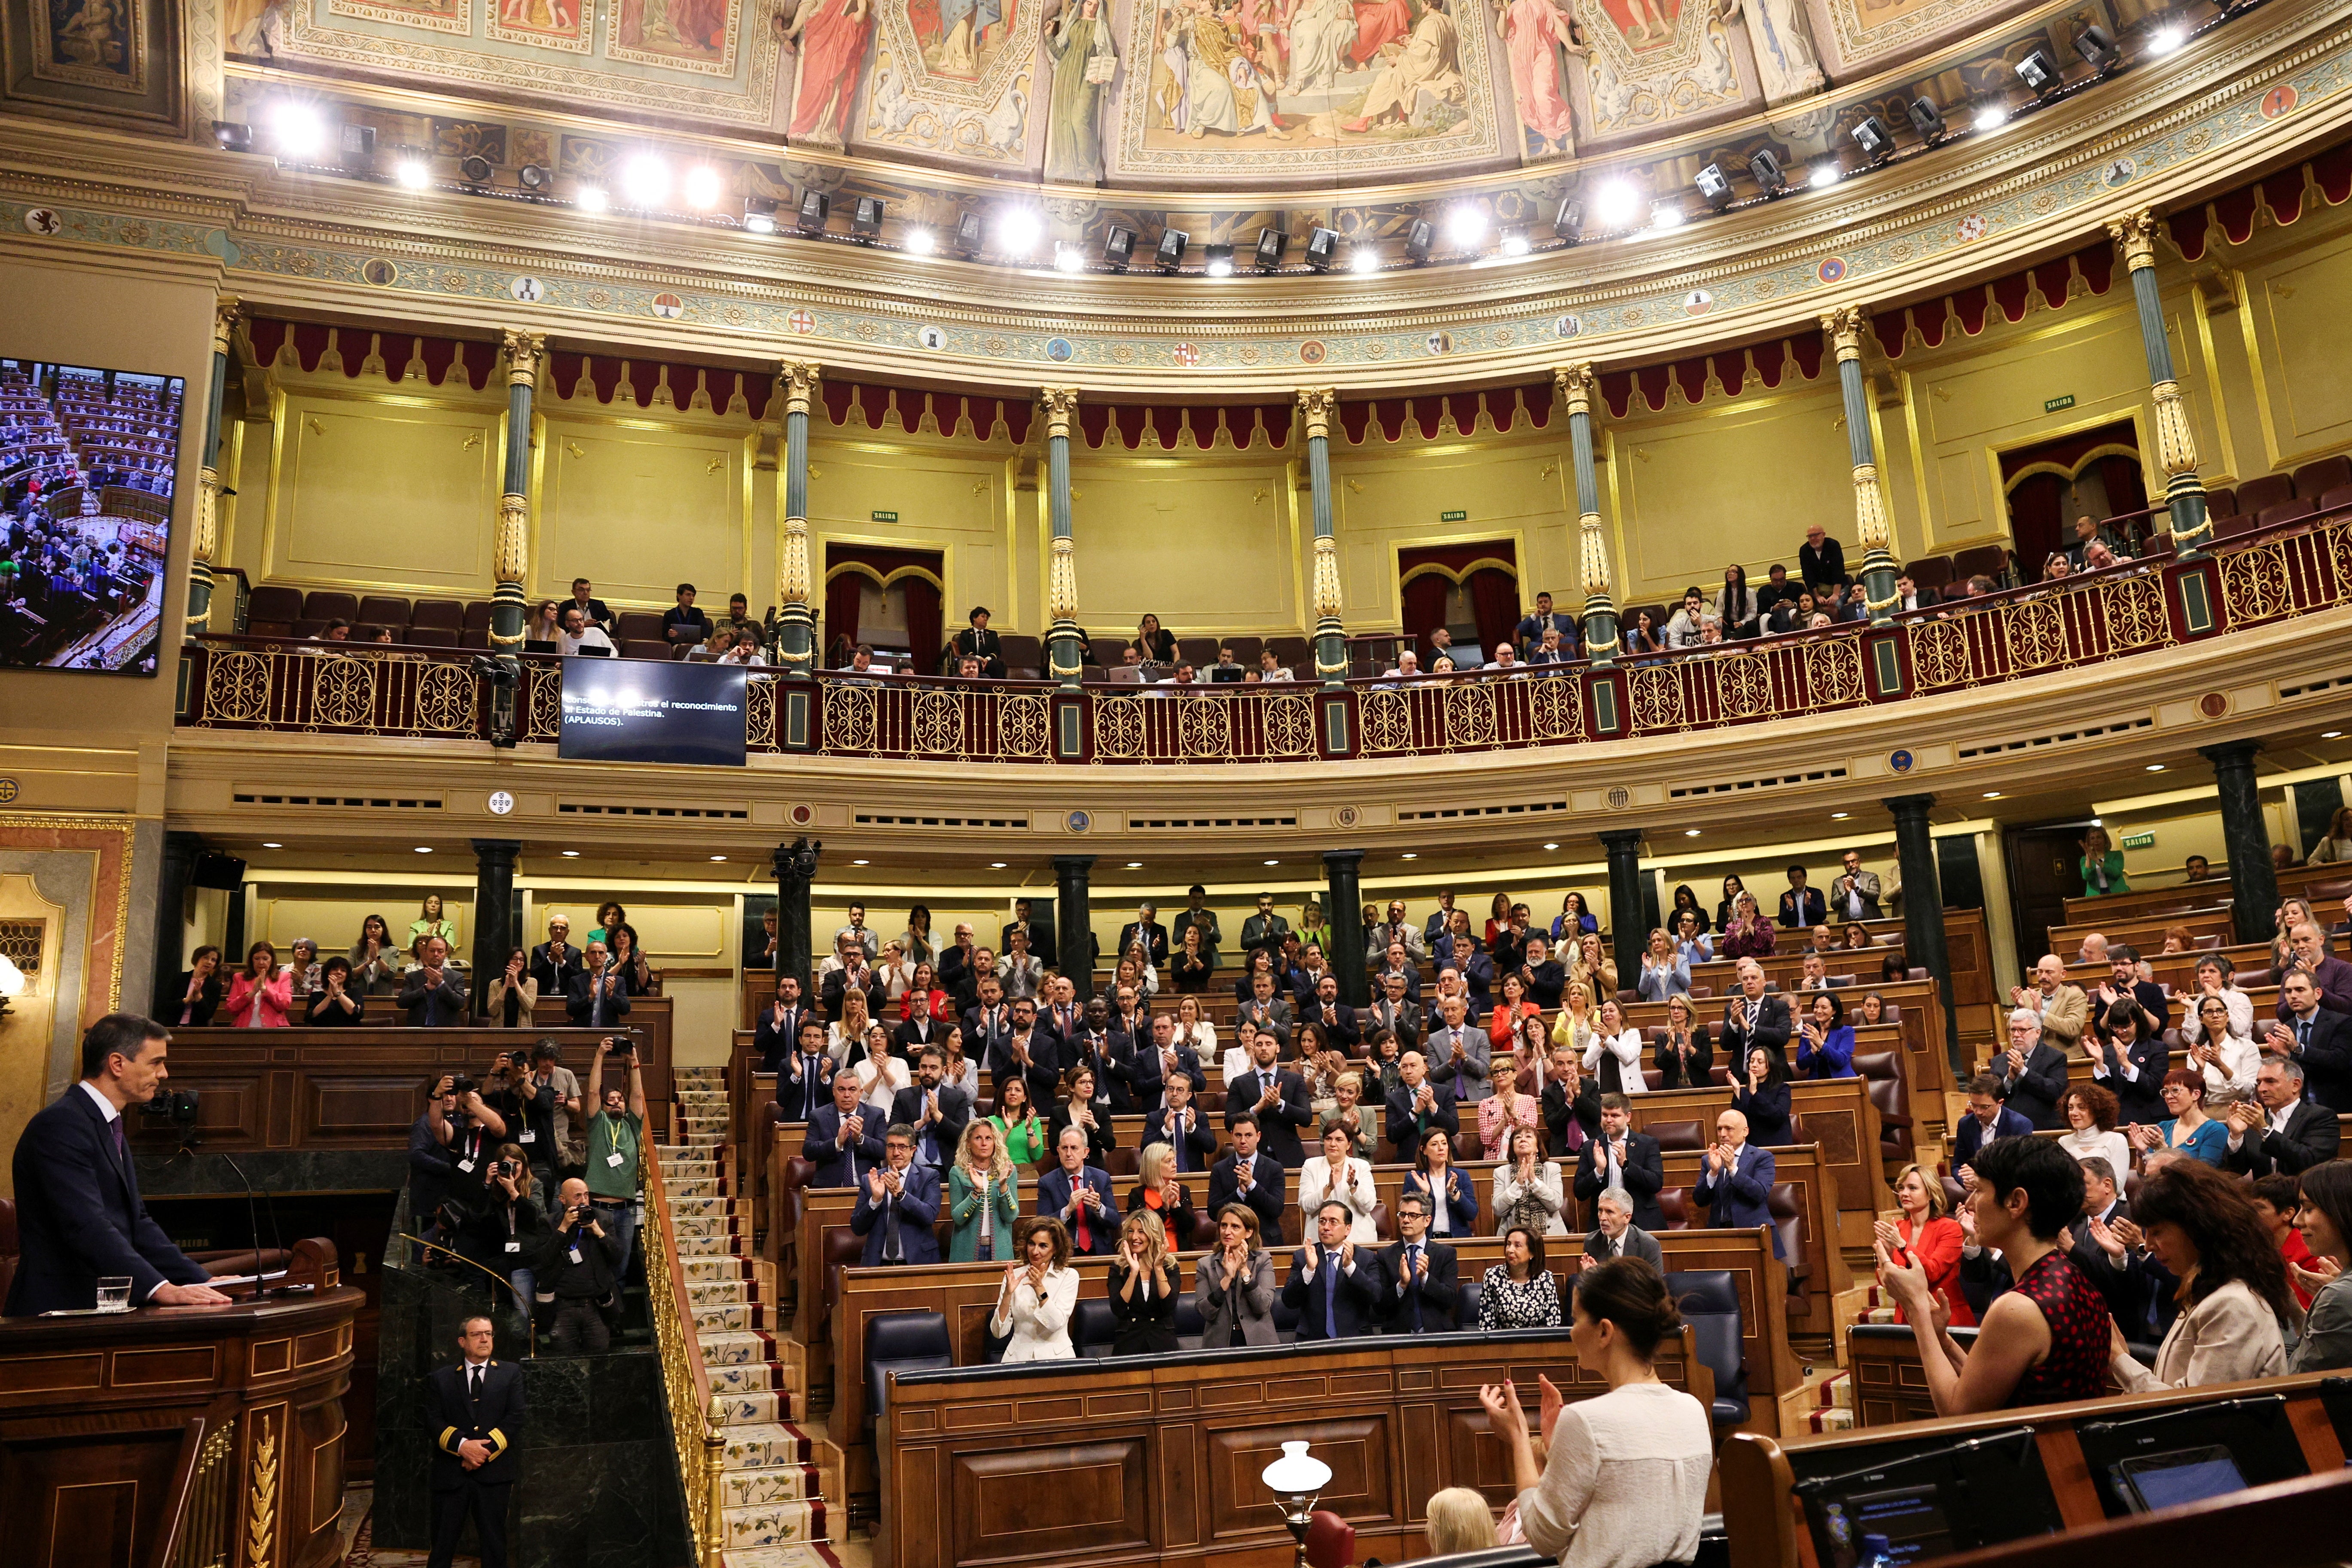 Spanish prime minister Pedro Sanchez receives applause as he announces that the country’s council of ministers will recognise an independent Palestinian state during a plenary session of the lower house of the Spanish parliament